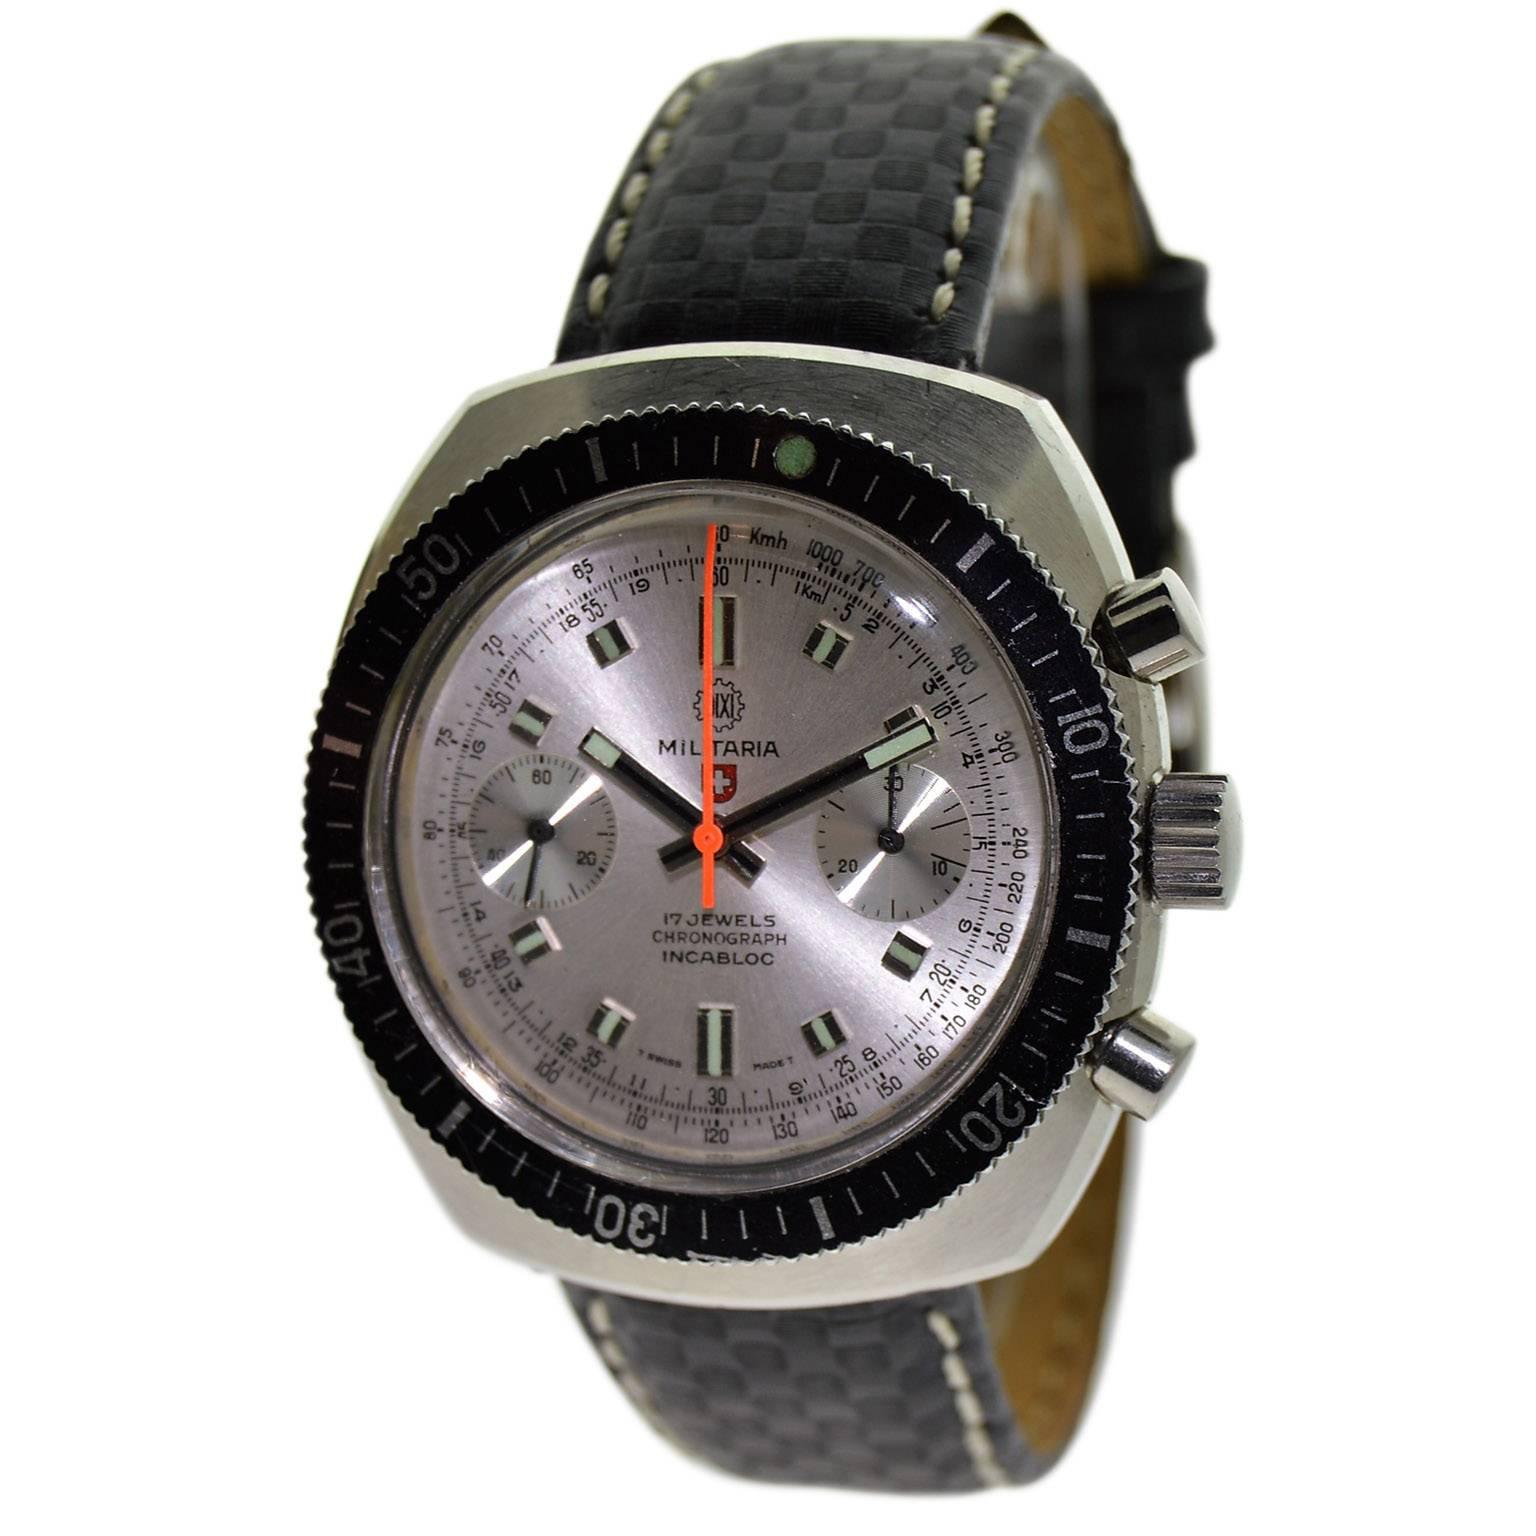 FACTORY / HOUSE: Militaria Watch Company
STYLE / REFERENCE: Cushion Shaped / Chronograph
METAL / MATERIAL:  Stainless Steel 
CIRCA: 1970's
DIMENSIONS: Length 43mm X Width 39mm
MOVEMENT / CALIBER: Manual Winding / 17 Jewels / Incabloc Cal. Valjoux